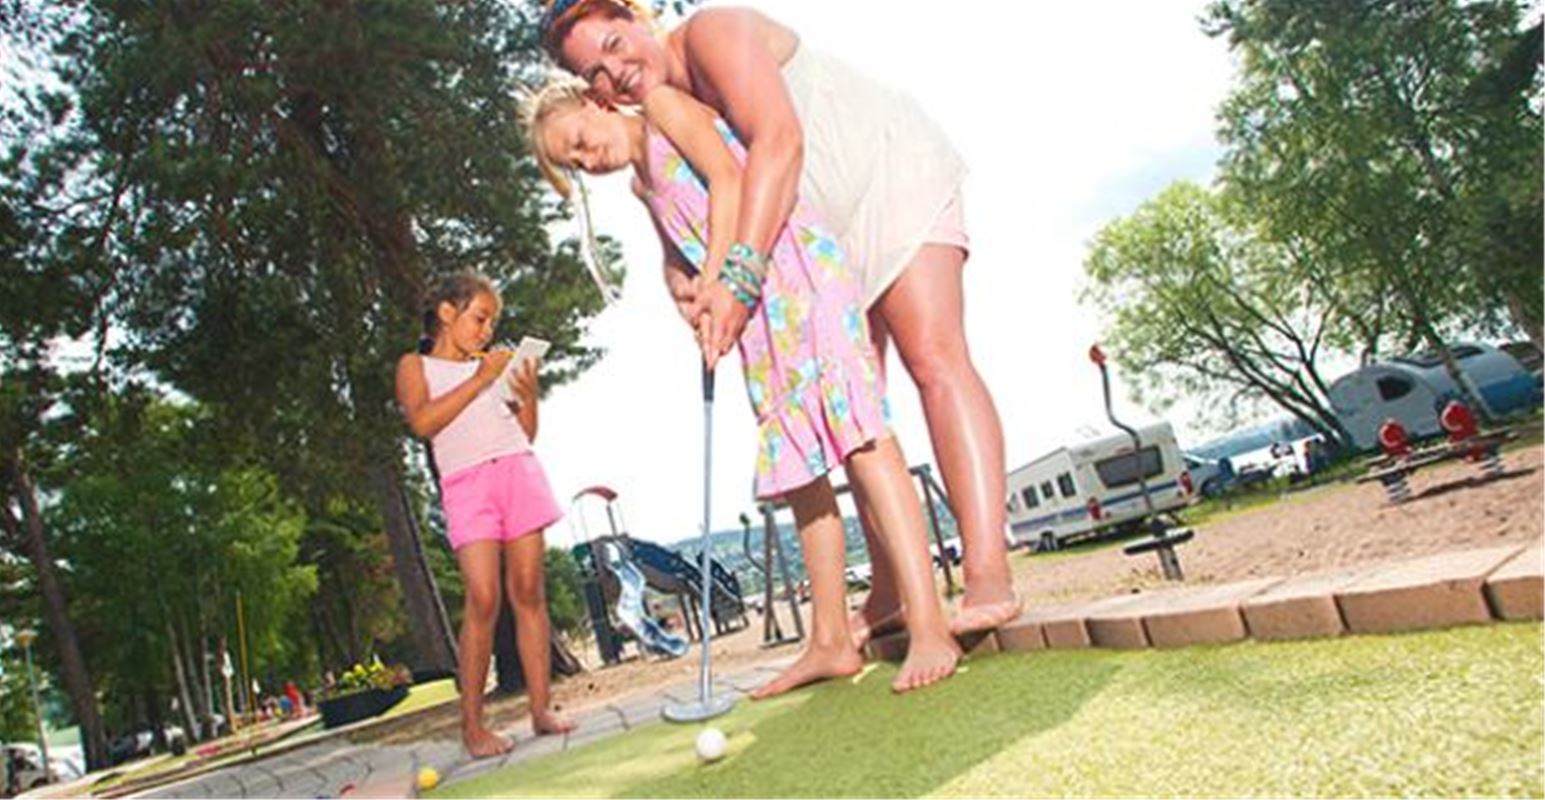 A family playing miniature golf.